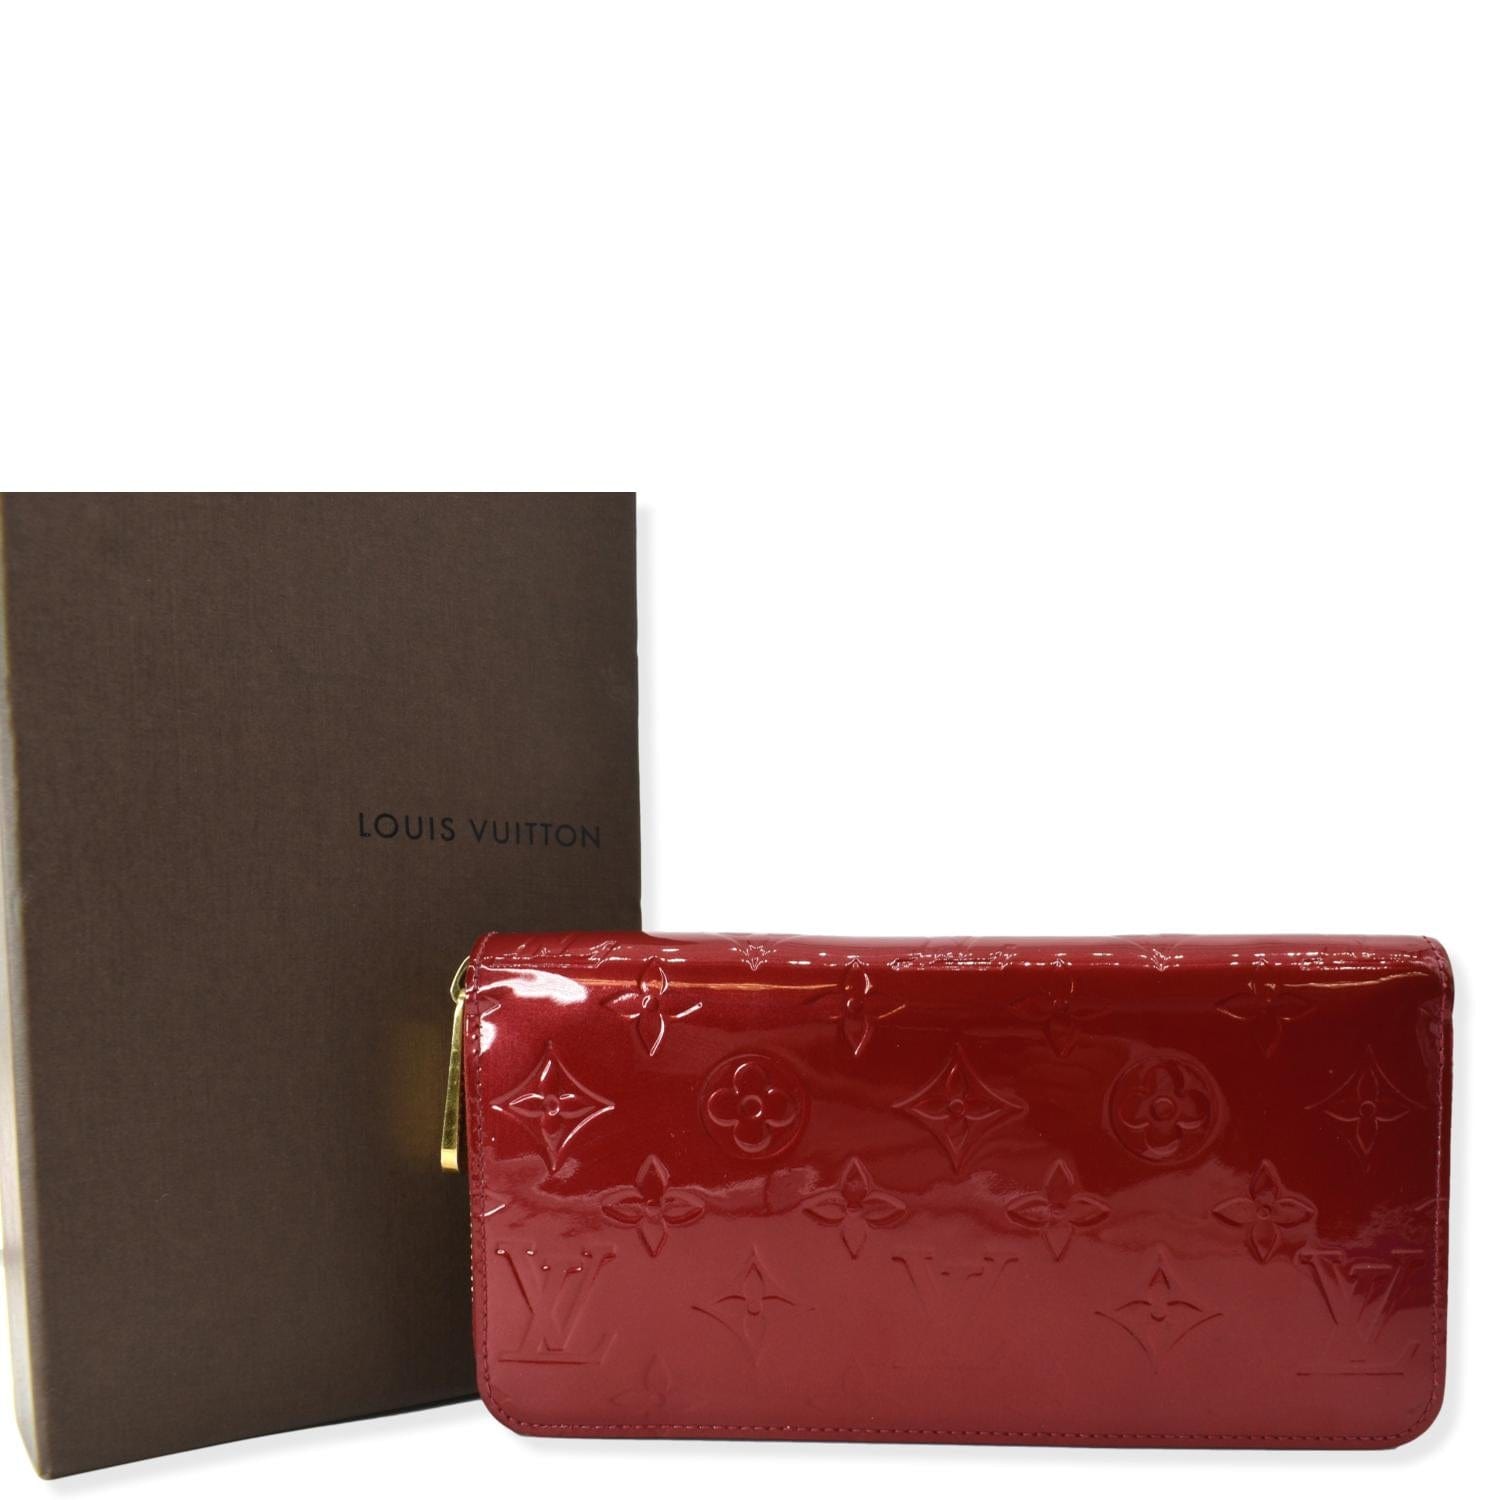 LOUIS VUITTON Vernis: Peony Pink, LV Logo Patent Leather Card Wallet  (xp)